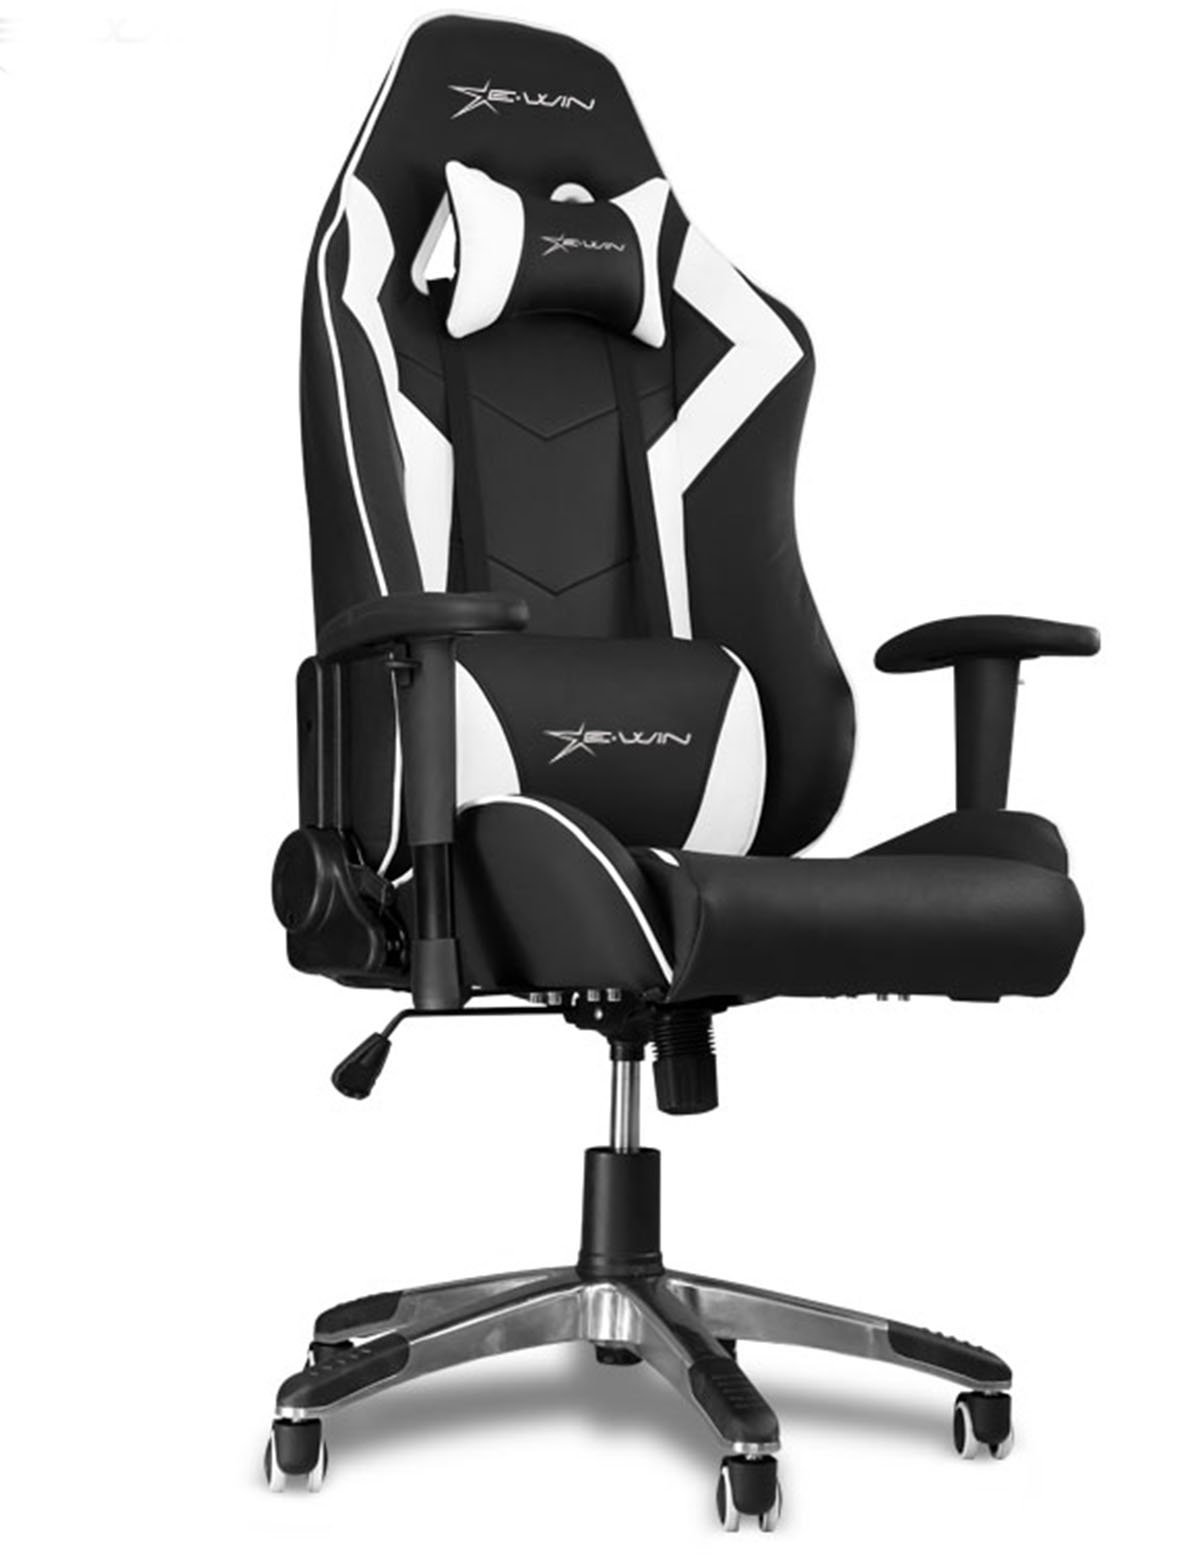 Fortryd Tegn et billede Menstruation EwinRacing ar Twitter: "GIVEAWAY TIME!!! Wanna to Be the Winner of E-Win  Champion Series Gaming Chair! Go now!! https://t.co/XFxptGreMX  https://t.co/MQi6QgBuHH" / Twitter